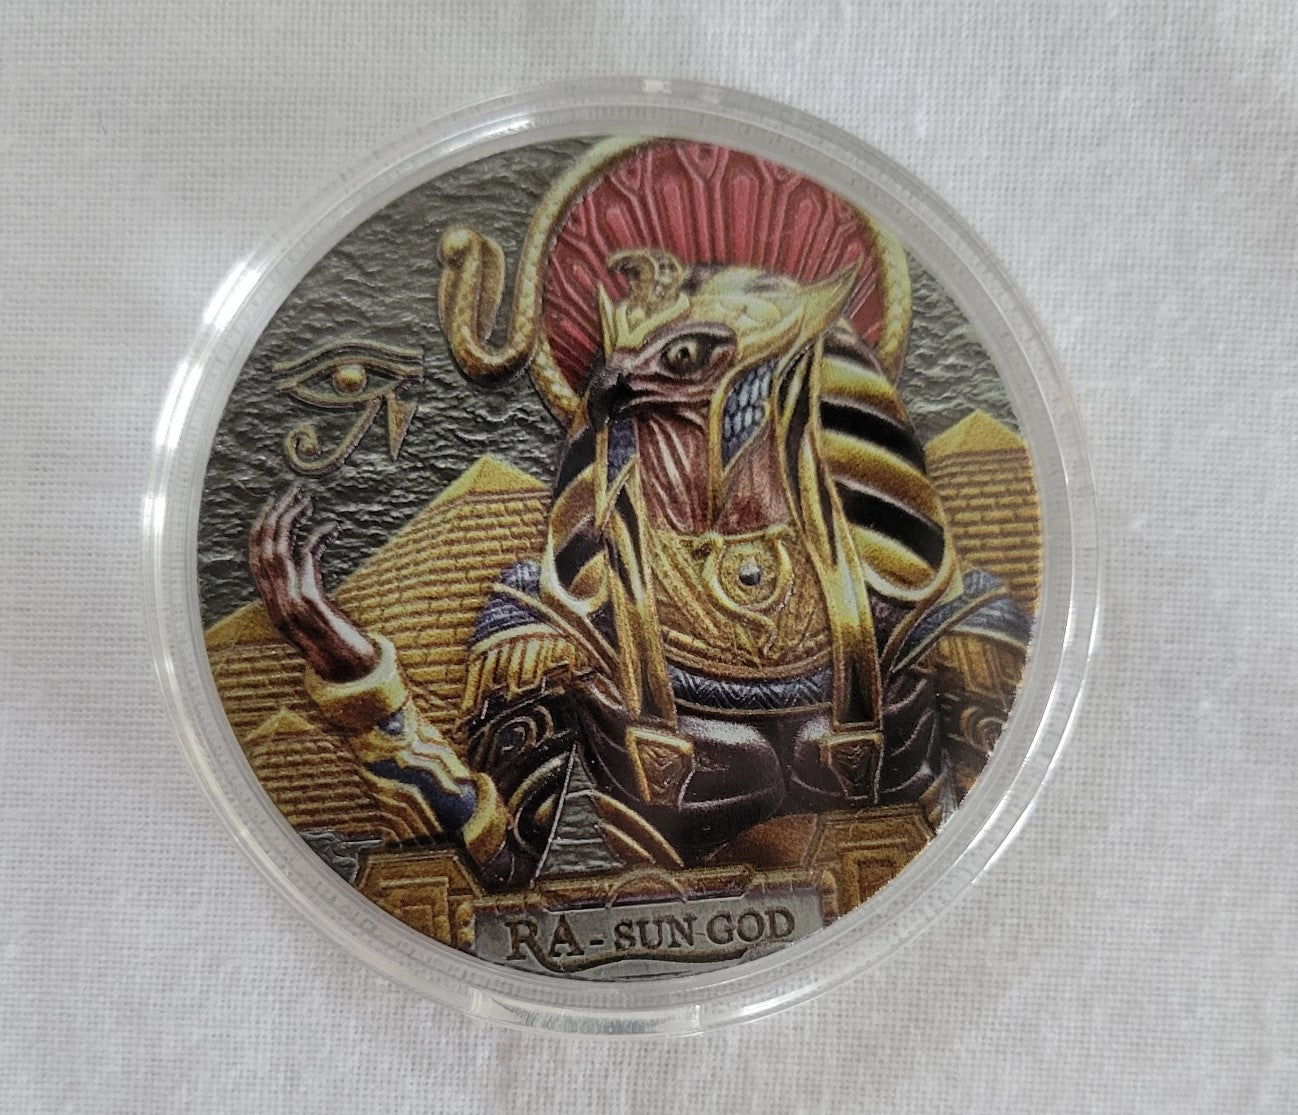 Collectible coin, 2019 one dollar, Cook Island coin with the Egyptian sun god Ra on one side and Queen Elizabeth II on the other. Front view.